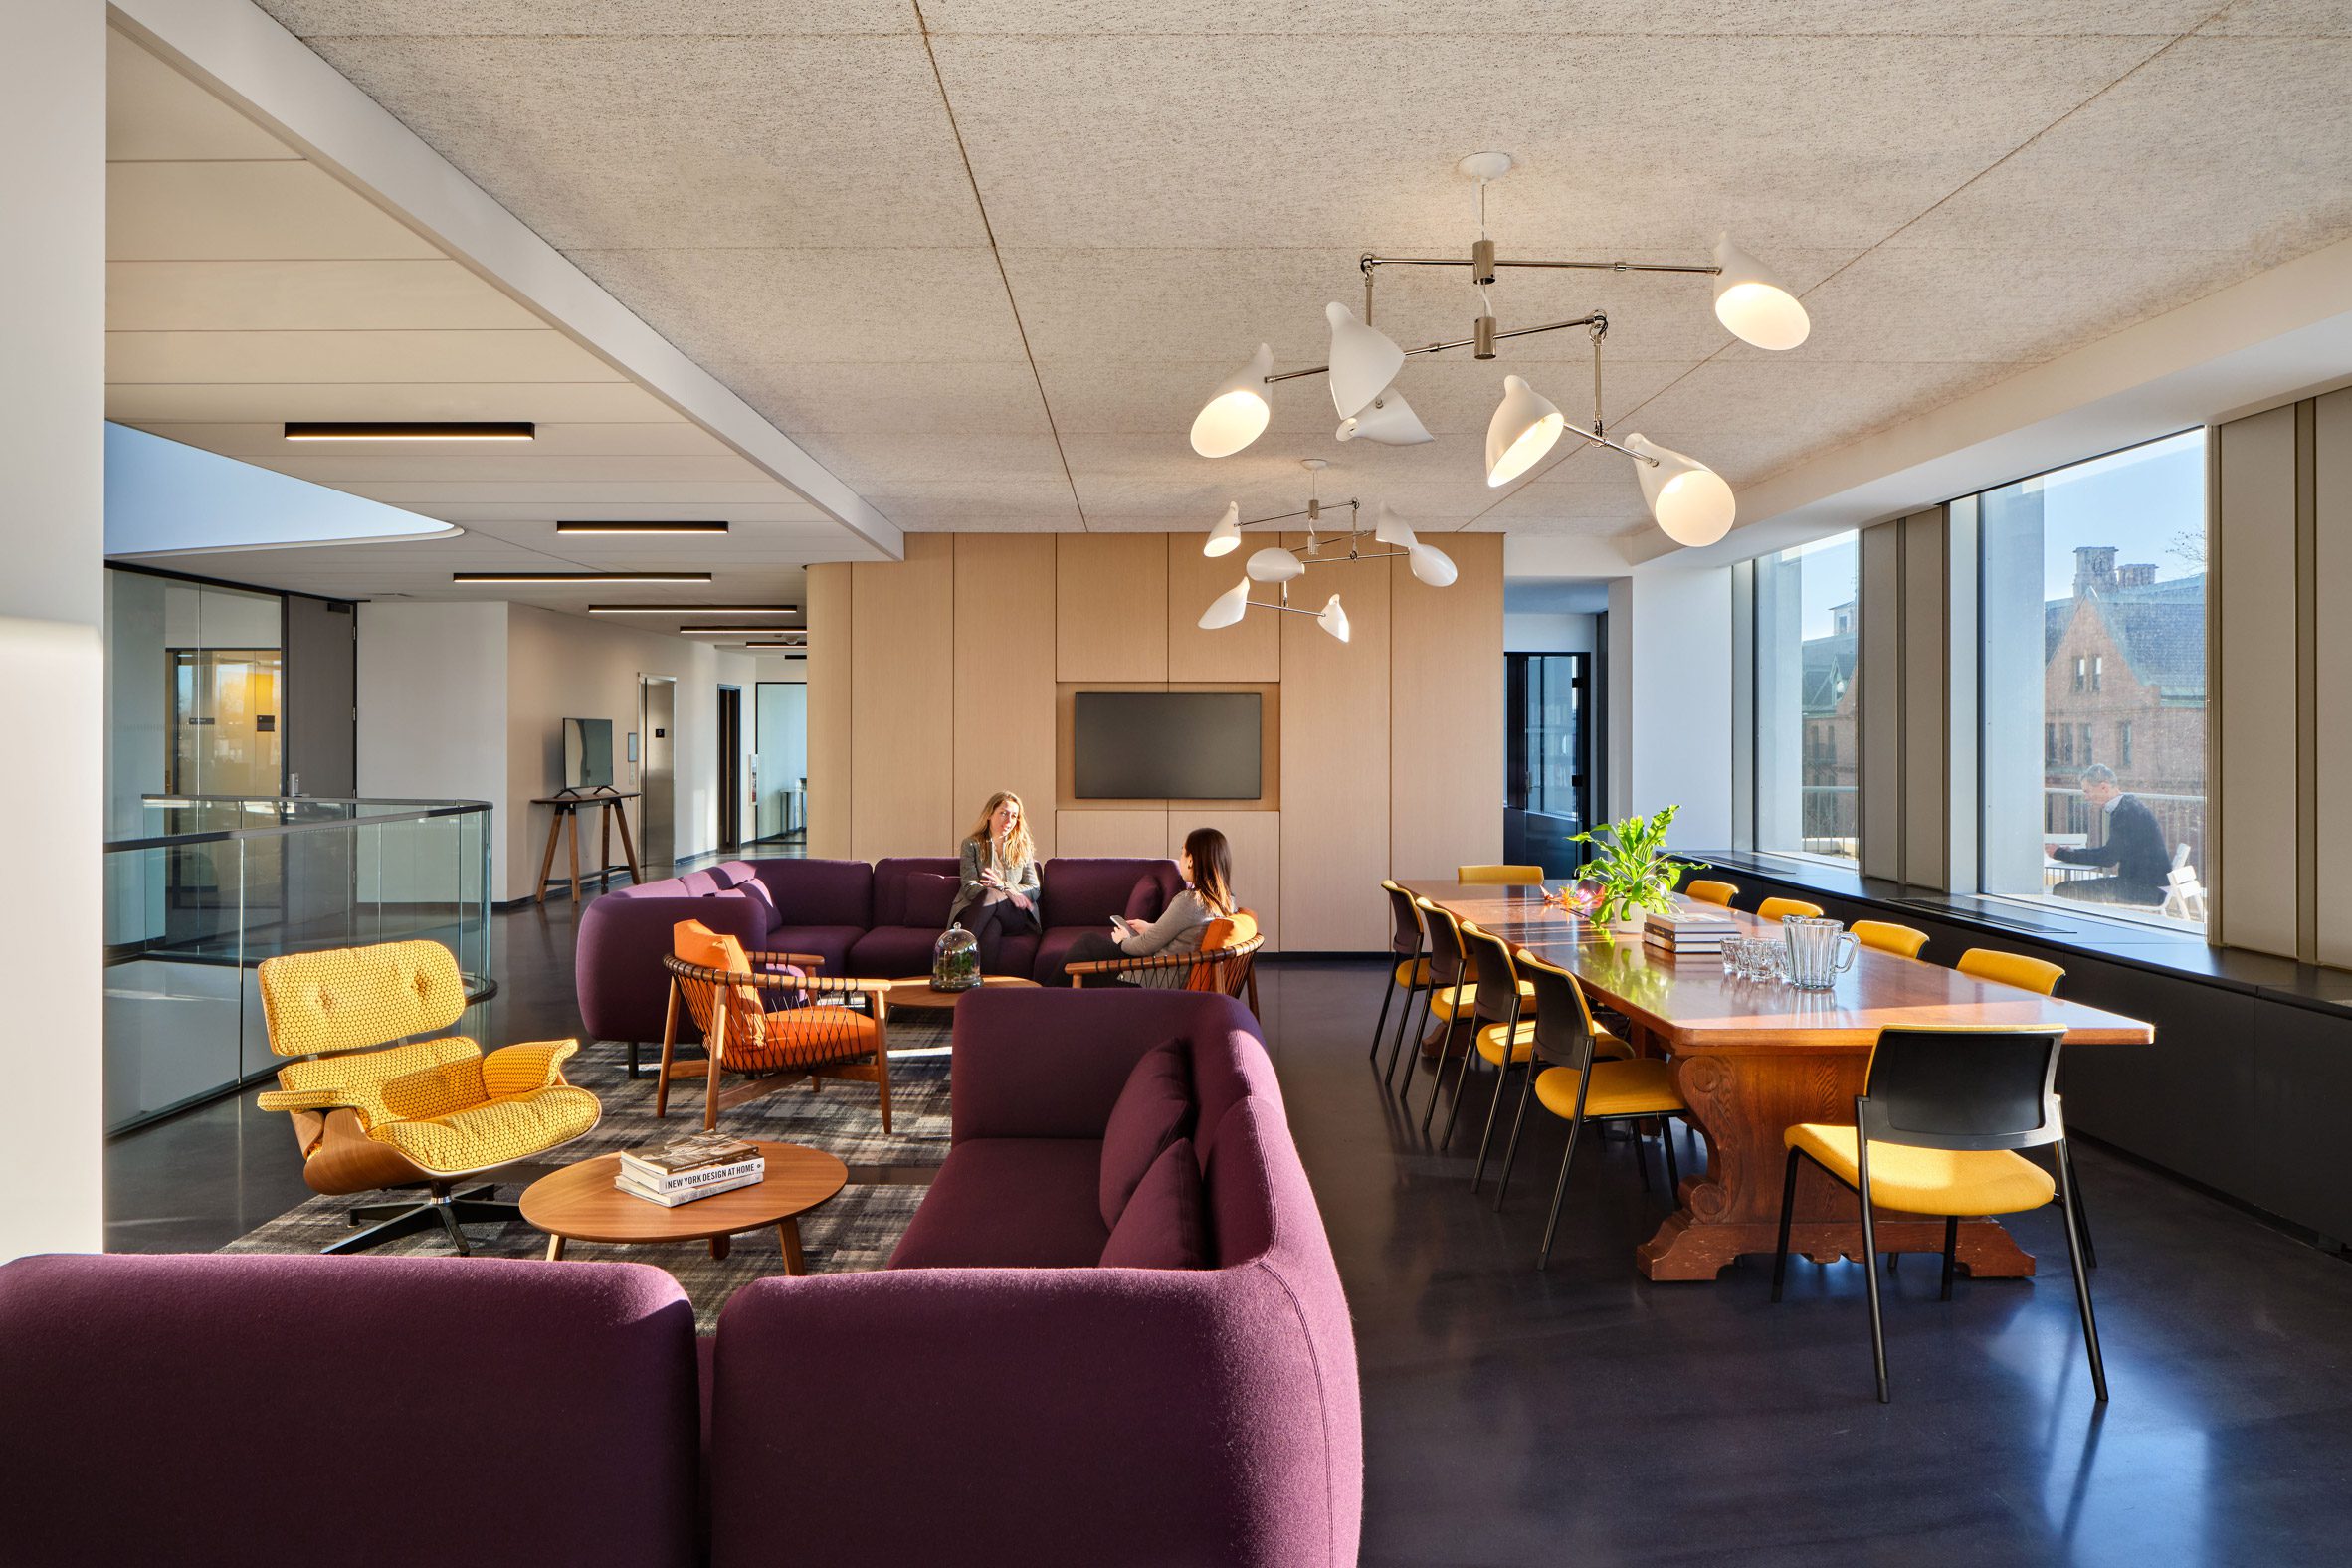 Colourful furniture within open-plan meeting space in Harvard building